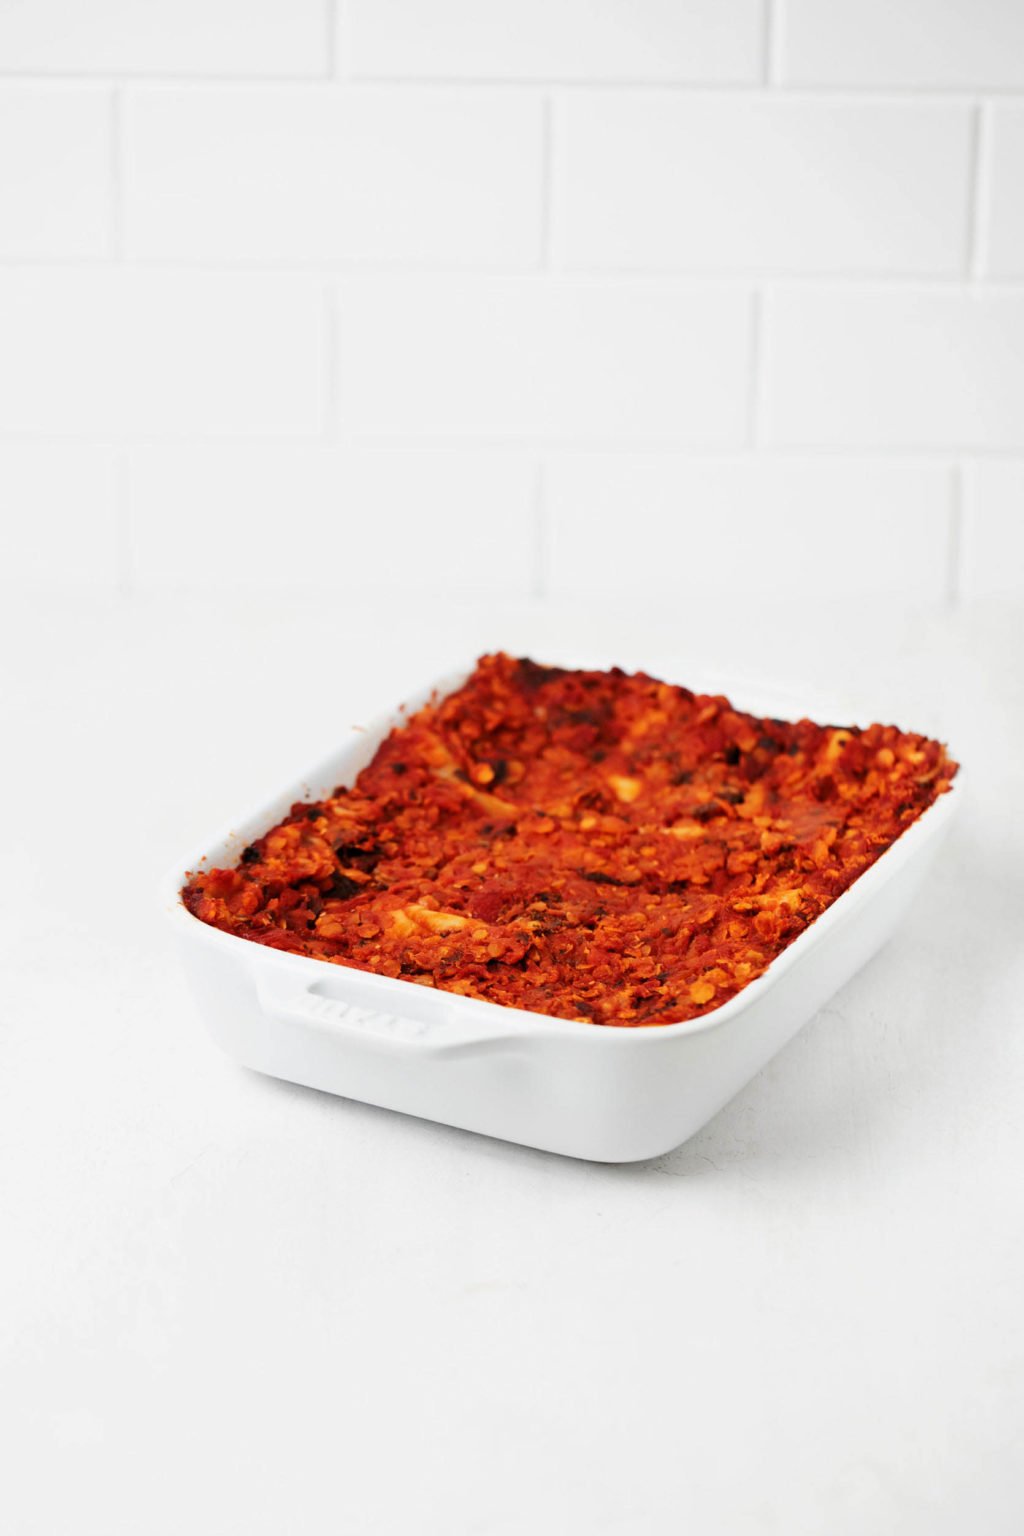 A dish of lasagna with a red, lentil-based sauce is resting on a white surface.